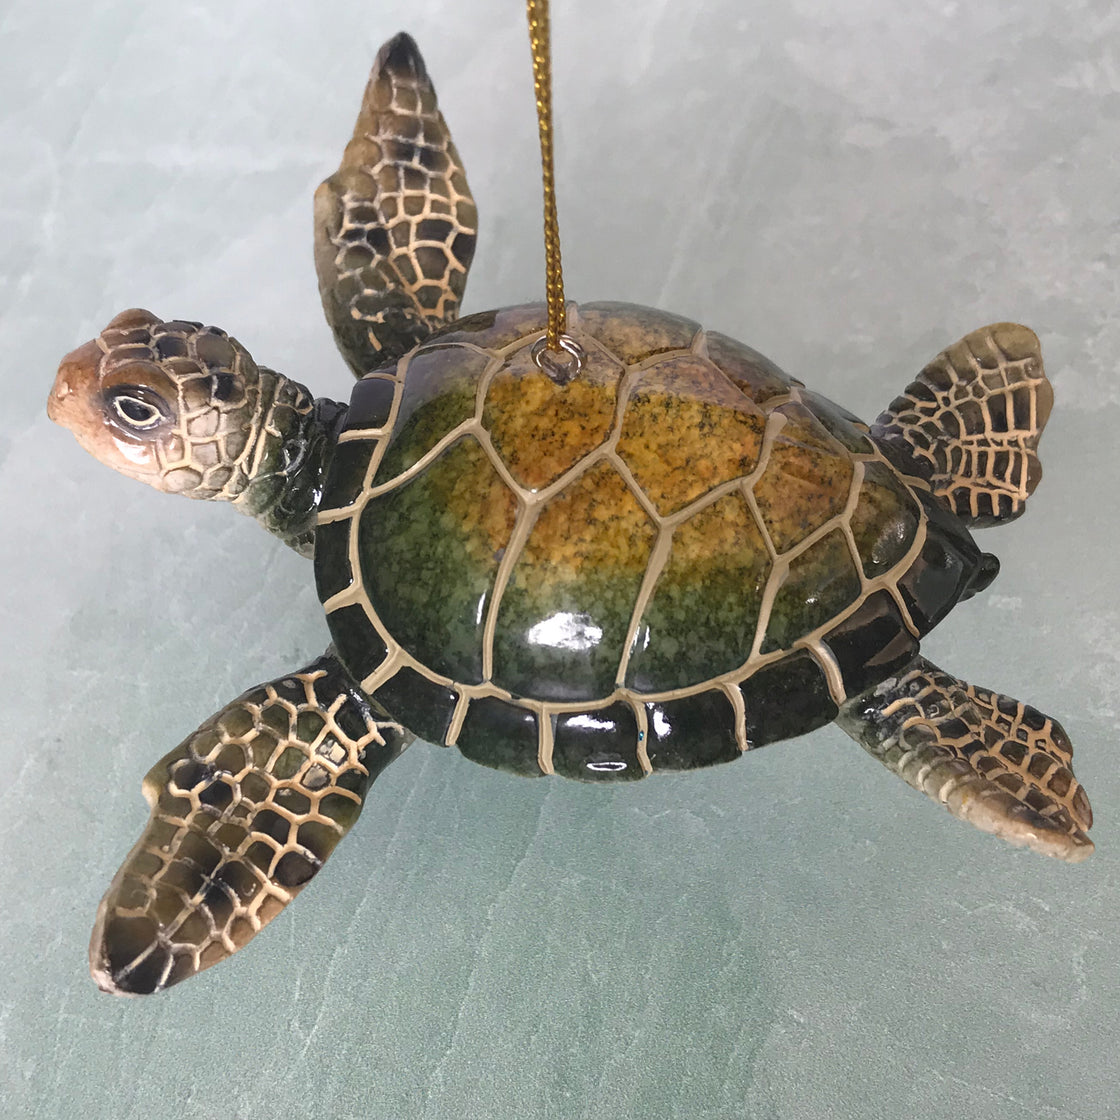 top view of hand-painted ceramic green sea turtle ornament